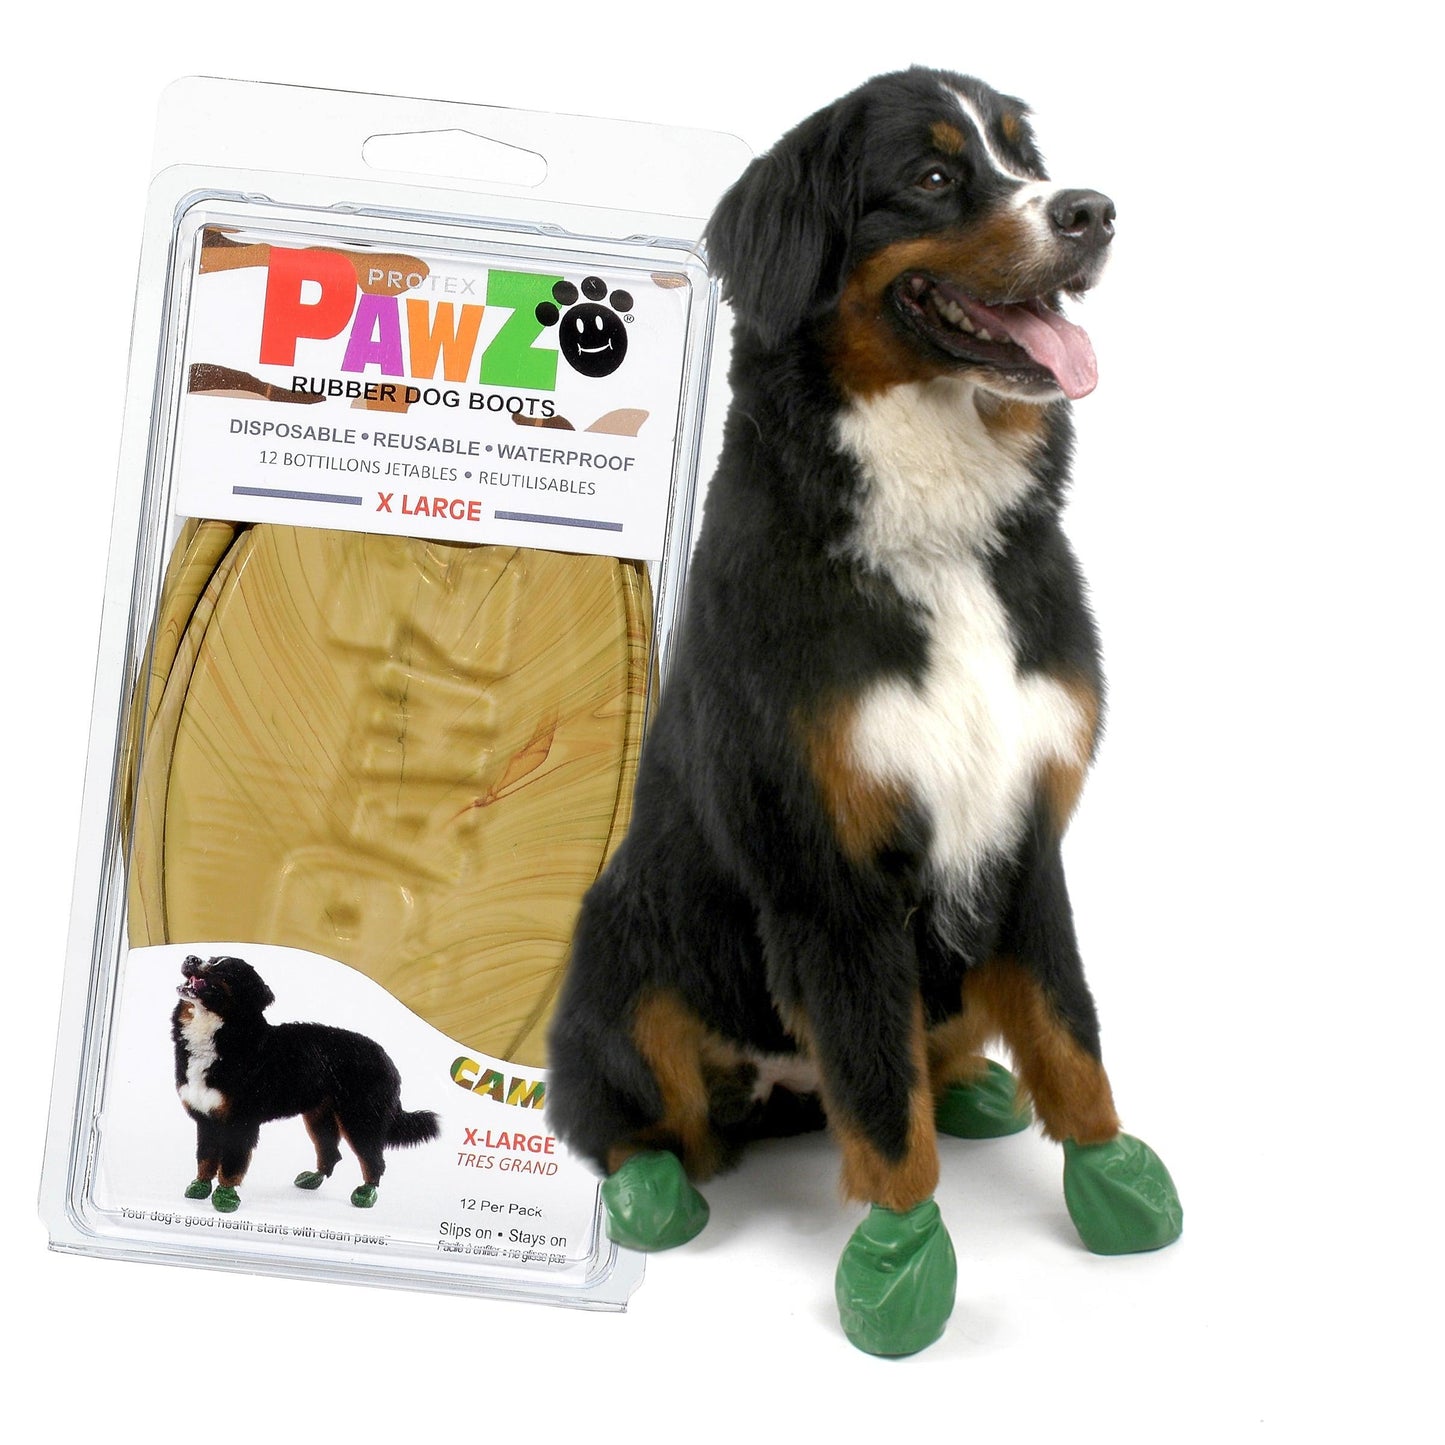 Bernese Mountain Dog and a pack of Pawz extra large dog boots in camo